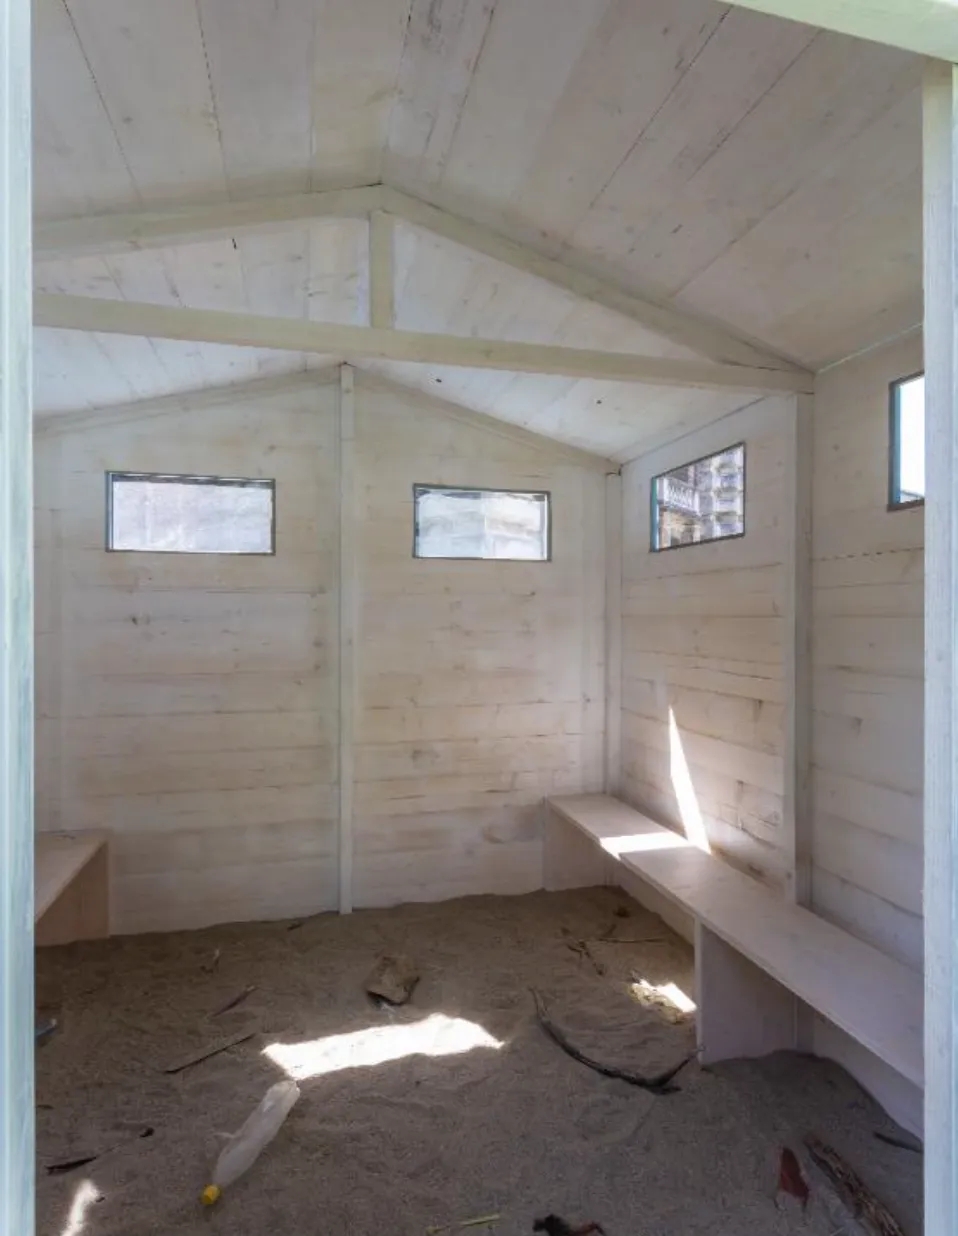 The inside of the wooden beach cabin with two wooden benches, sand and various sea debris on the floor